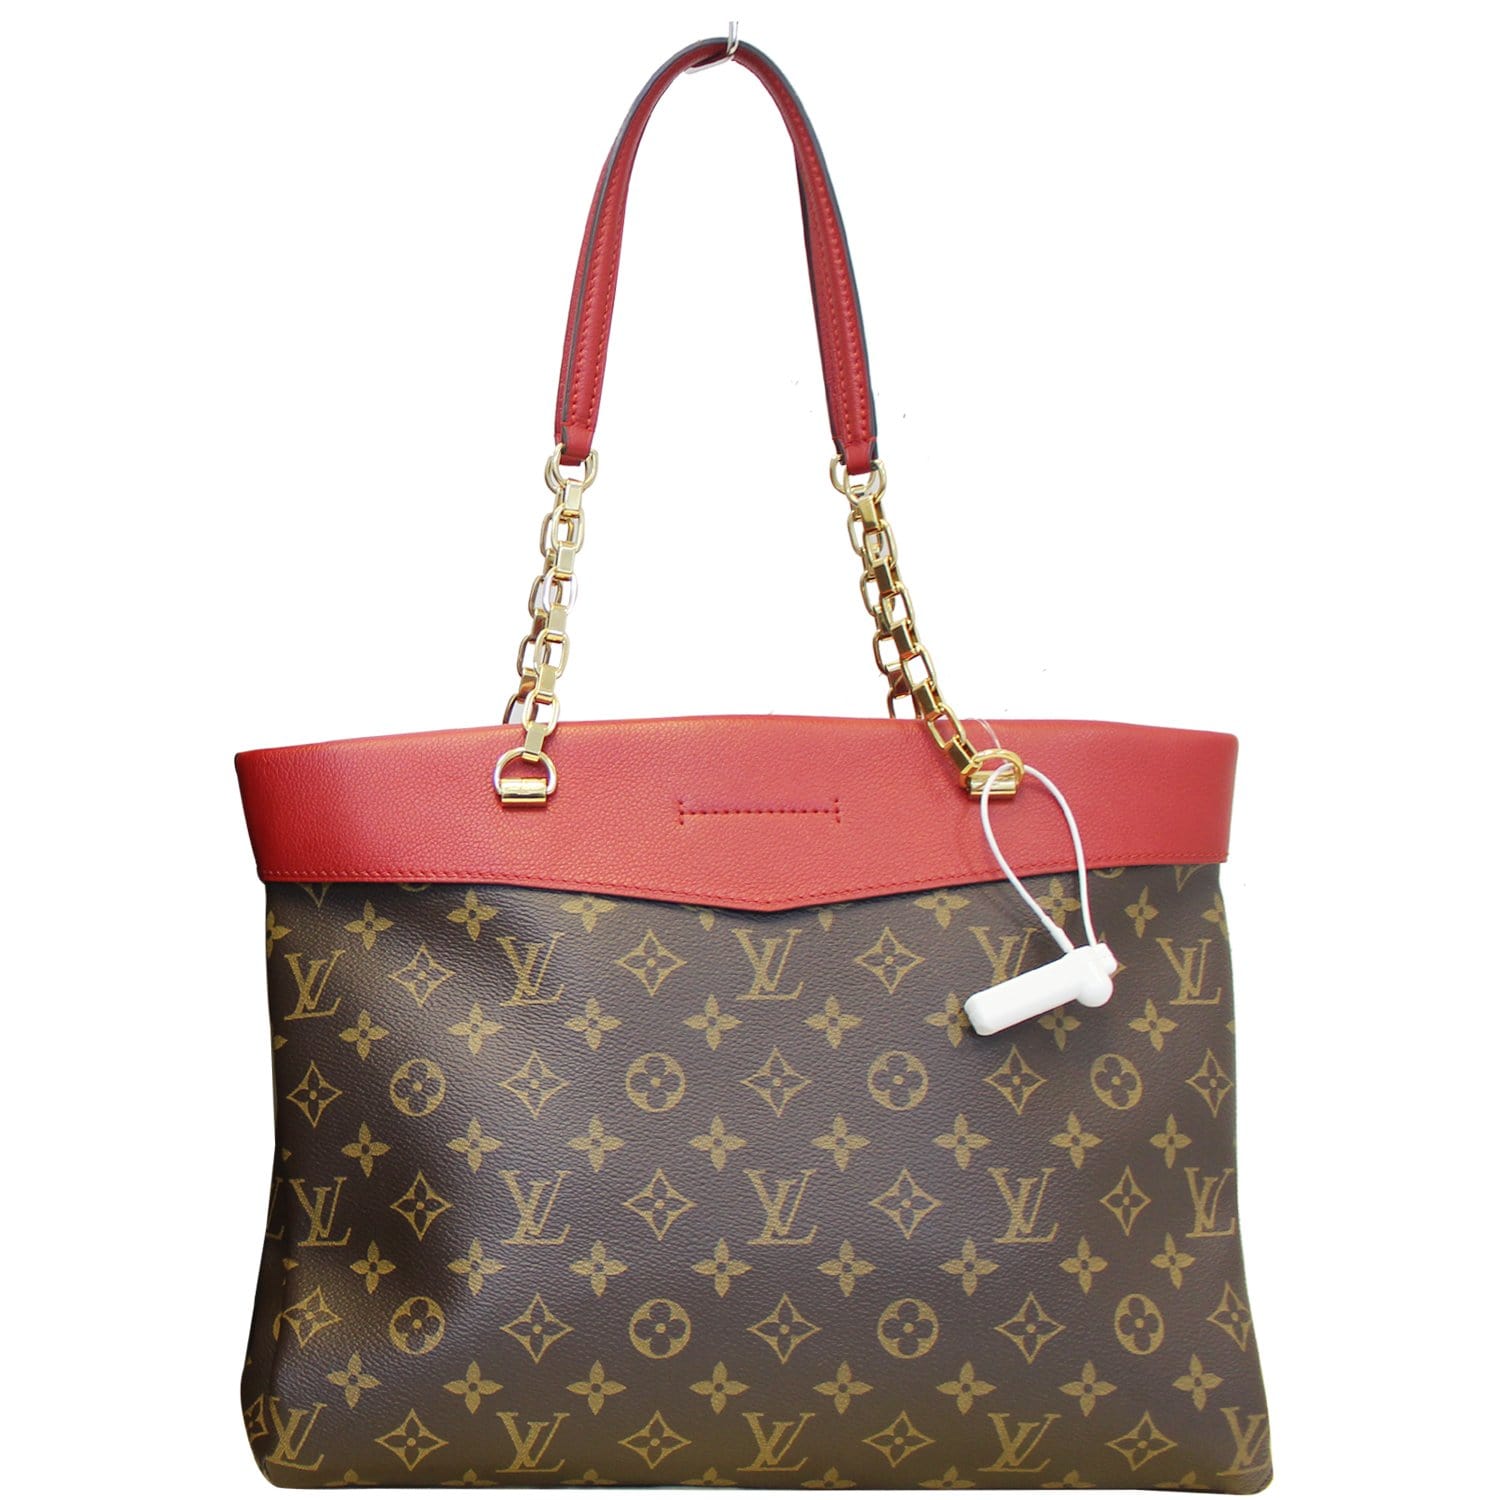 LV Bag with tri-colored Acrylic Chain Link Strap for Sale in Lansing